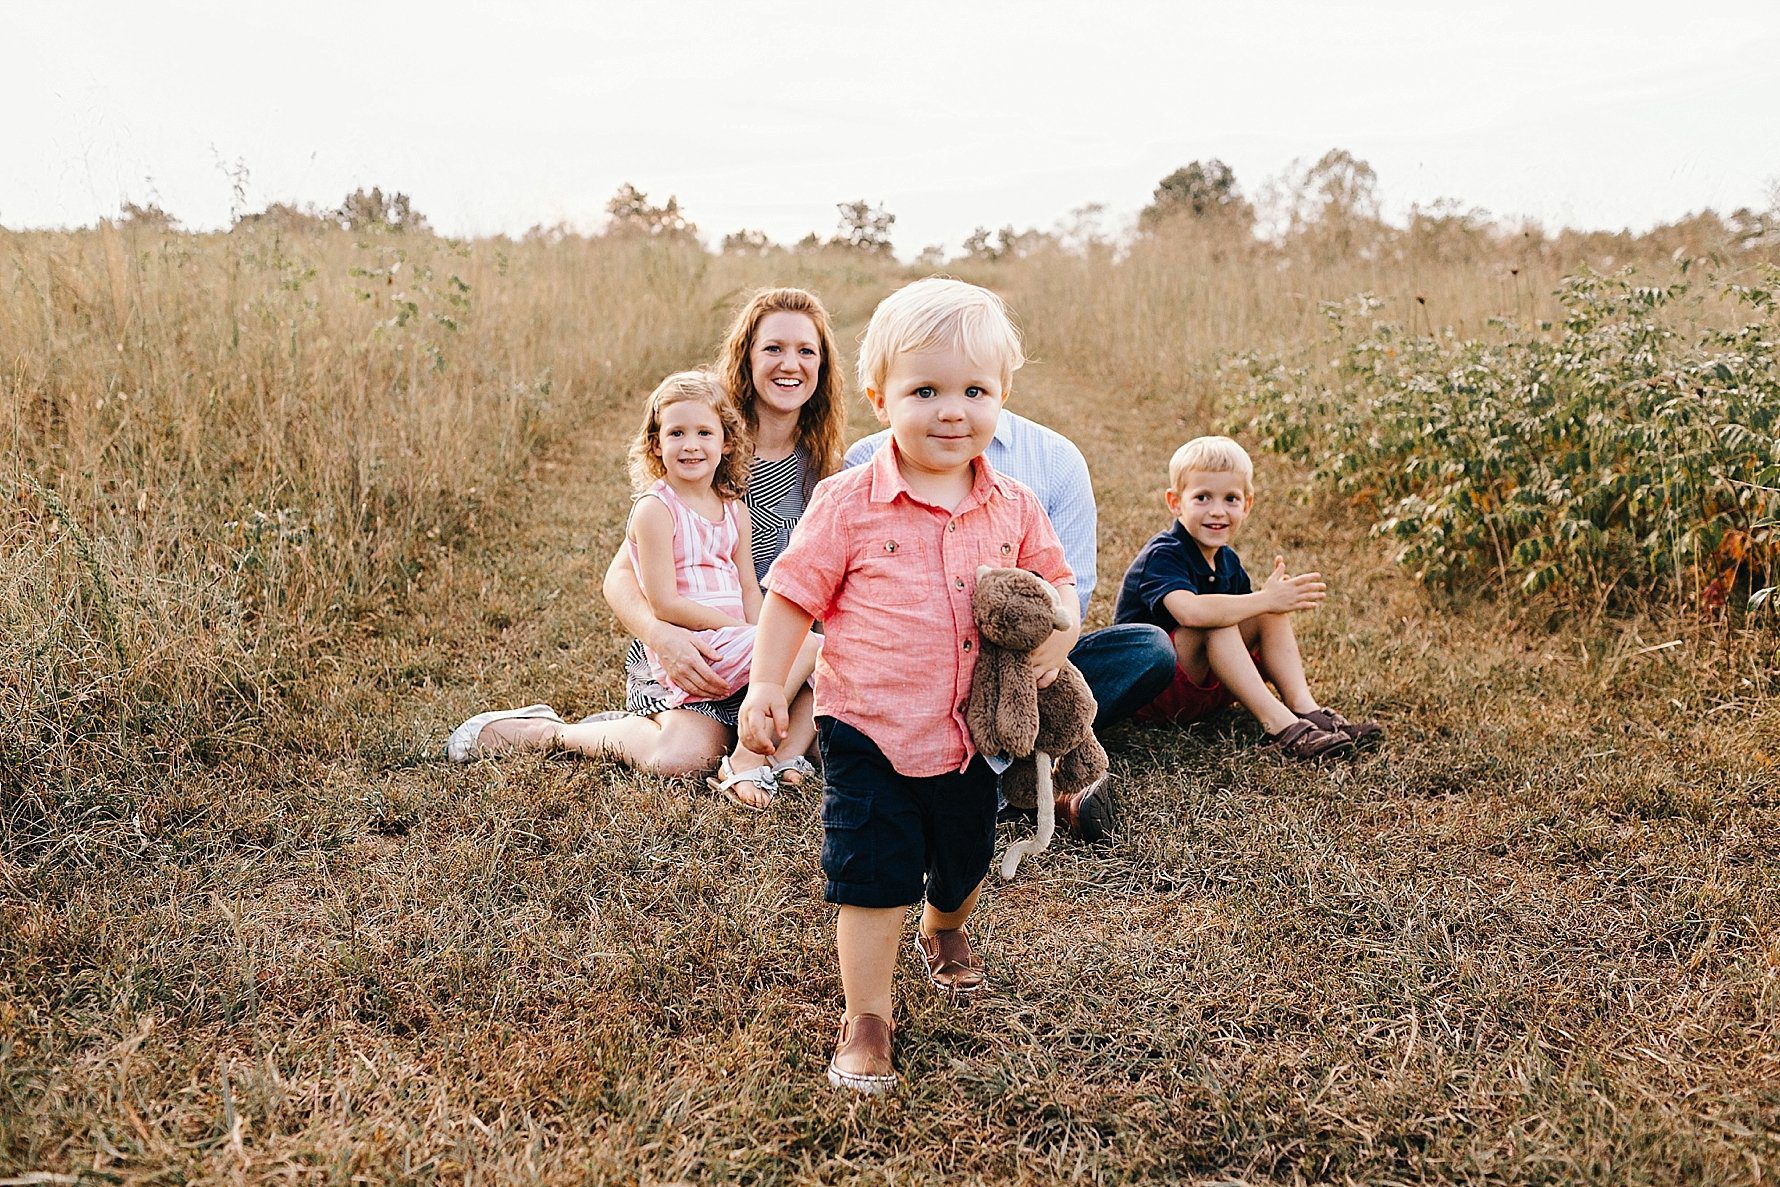 Knoxville Family Photos | Erin Morrison Photography www.erinmorrisonphotography.com